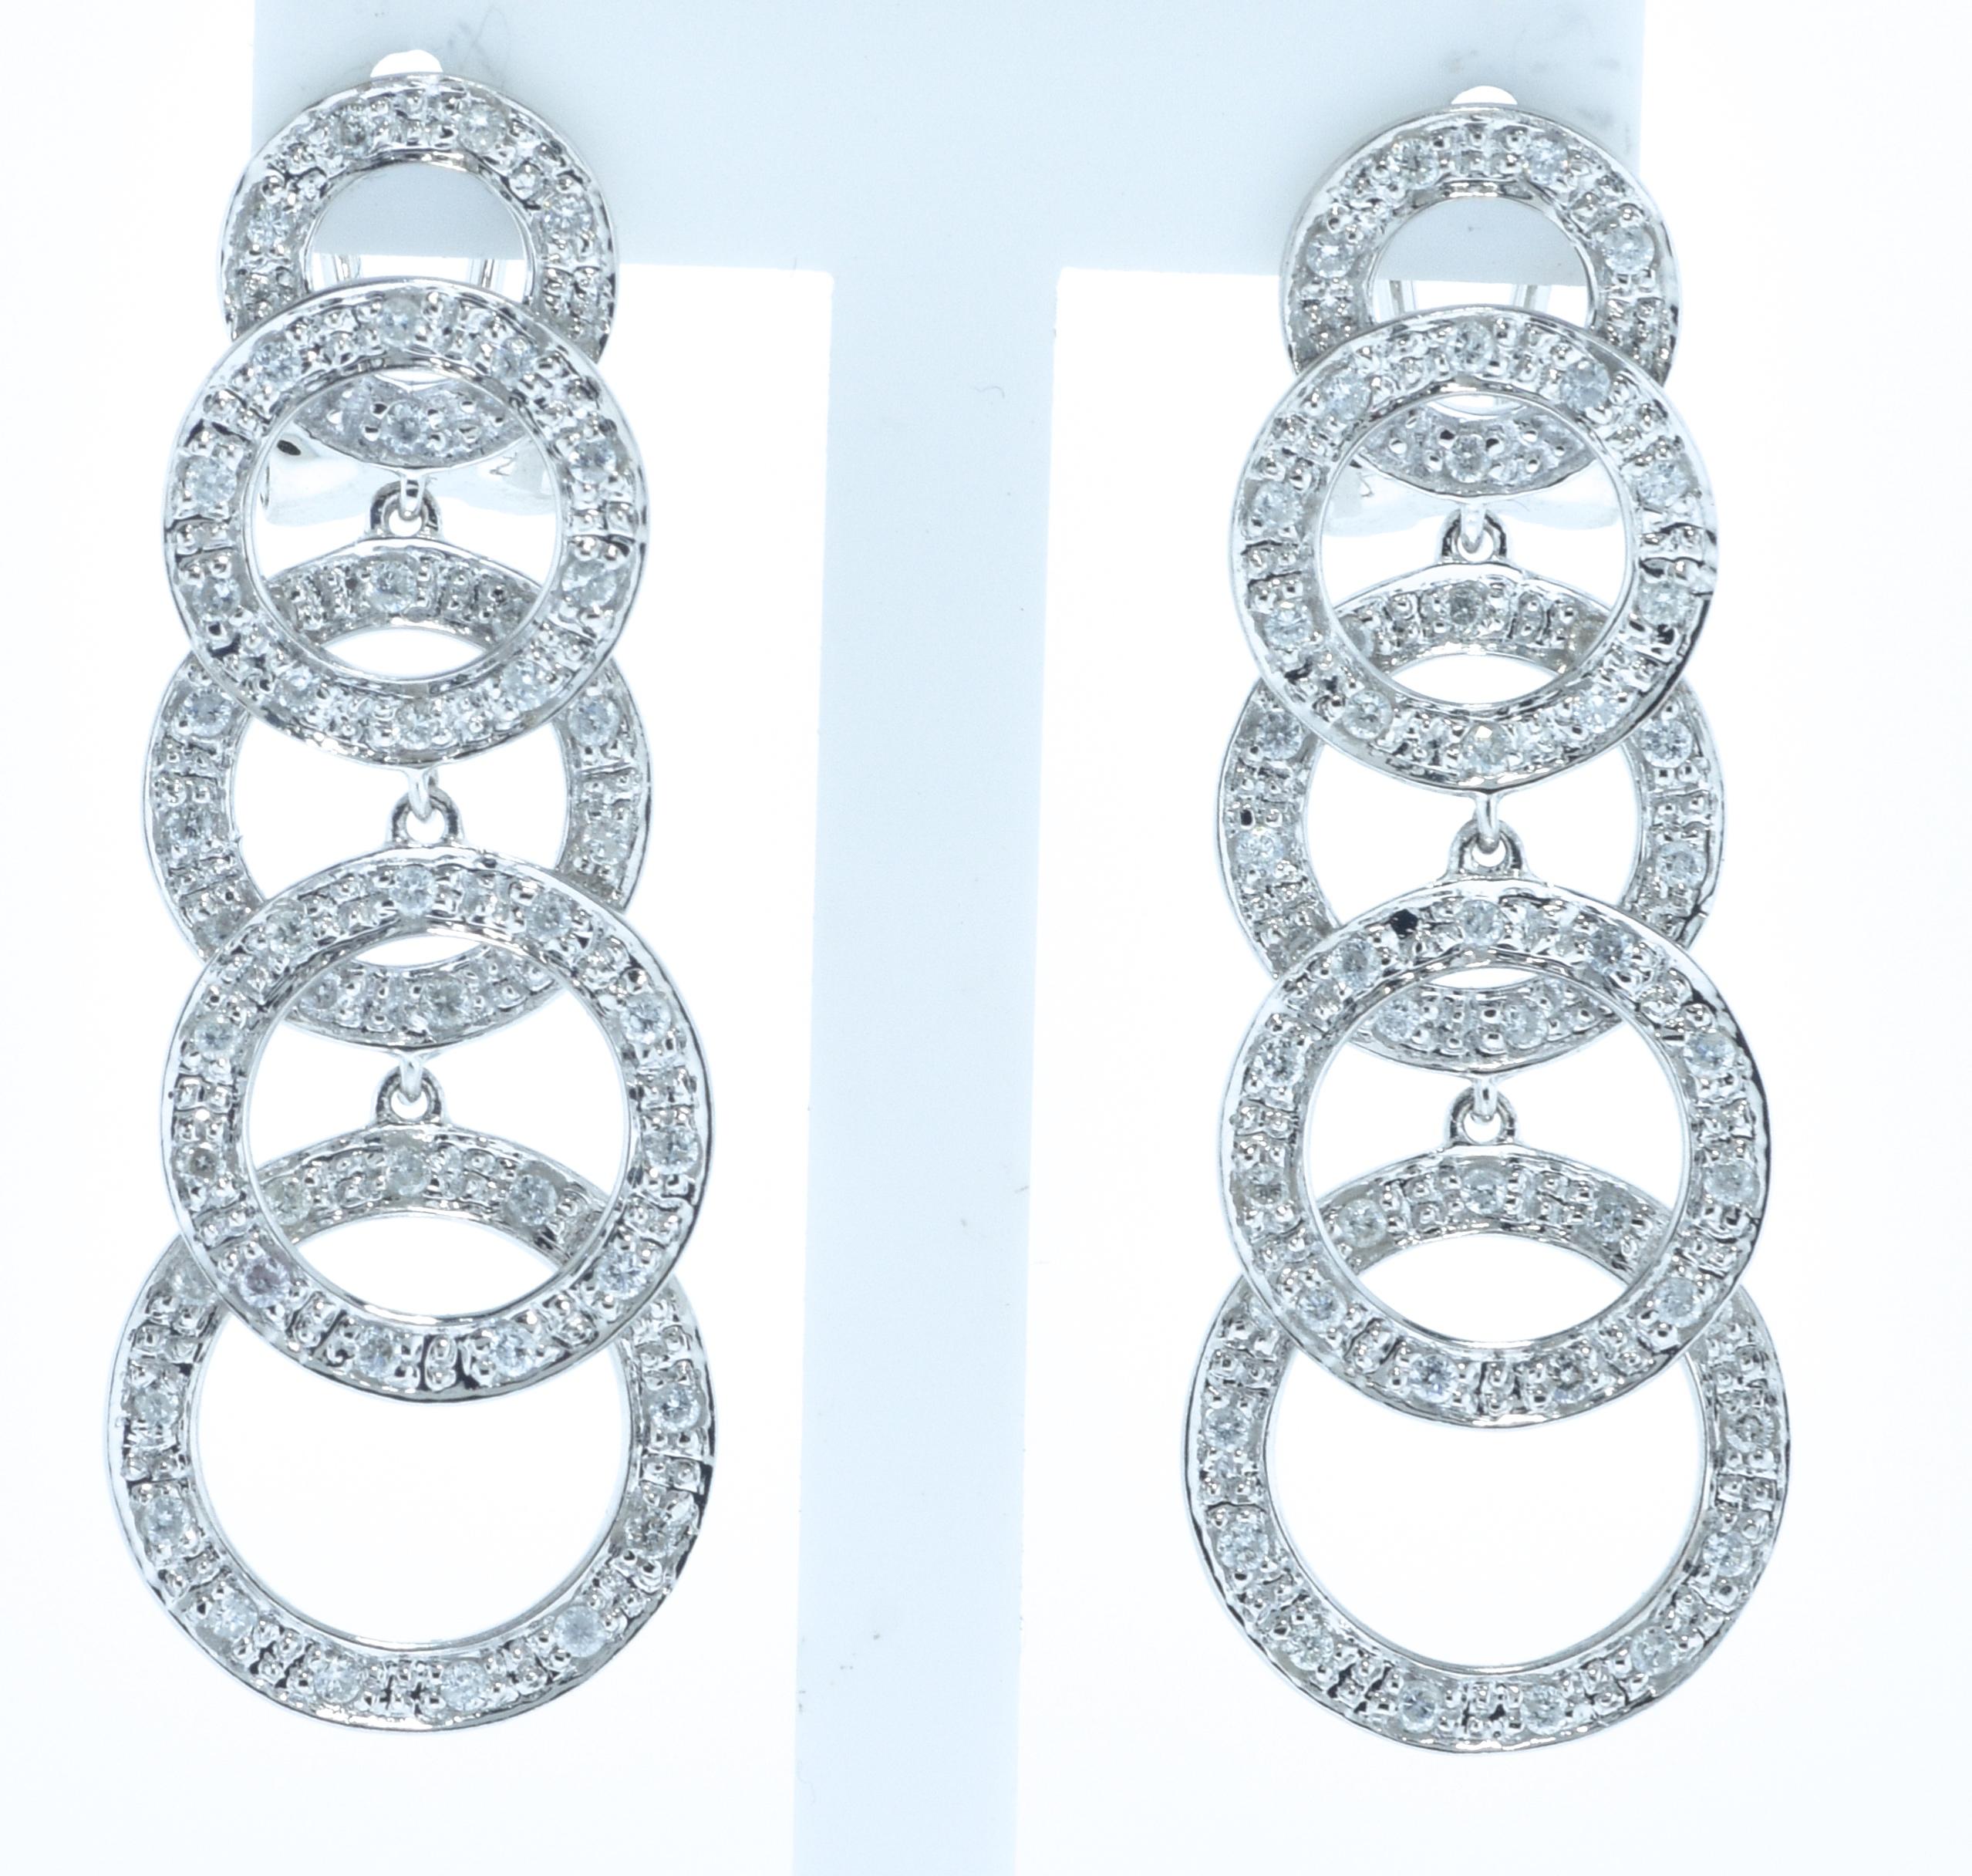  White gold dangling spheres studded with small round brilliant cut white diamonds.  There are 104 well matched diamonds amounting to approximately 1 ct.  These earrings have wonderful movement, they are 1.25 inches in length.  Distinctive and easy